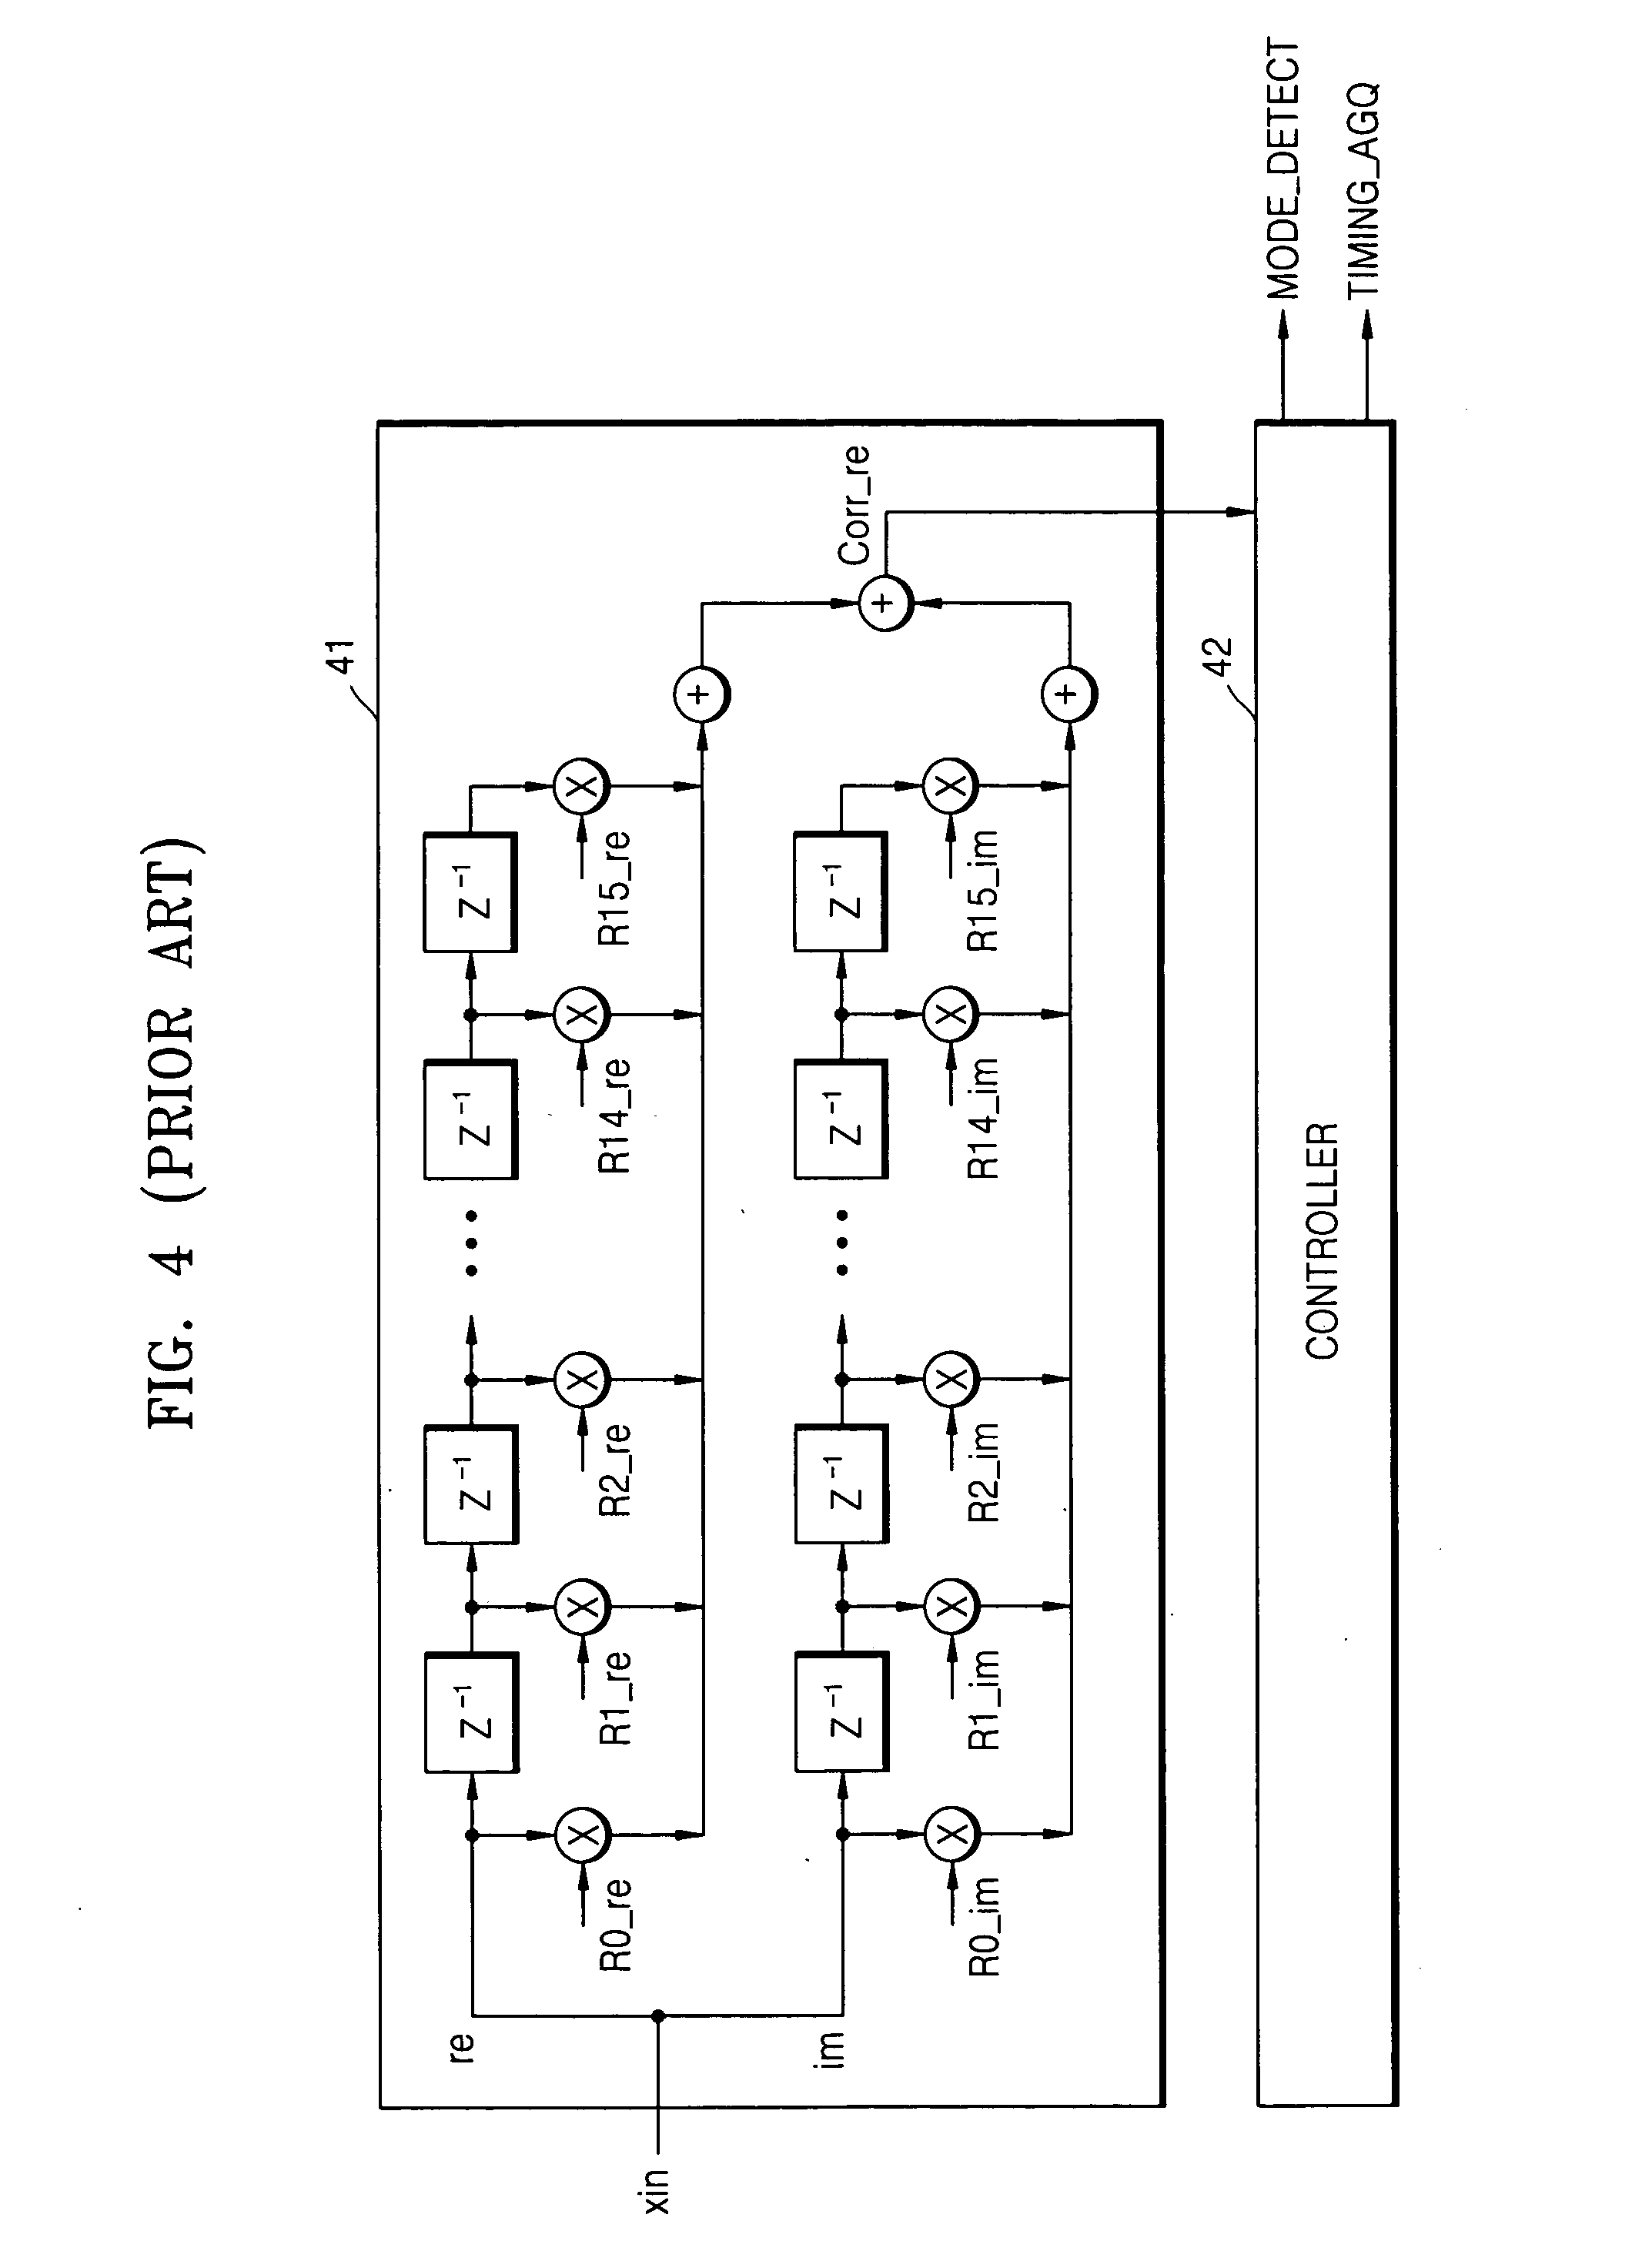 Method of receiving of OFDM signal having repetitive preamble signal